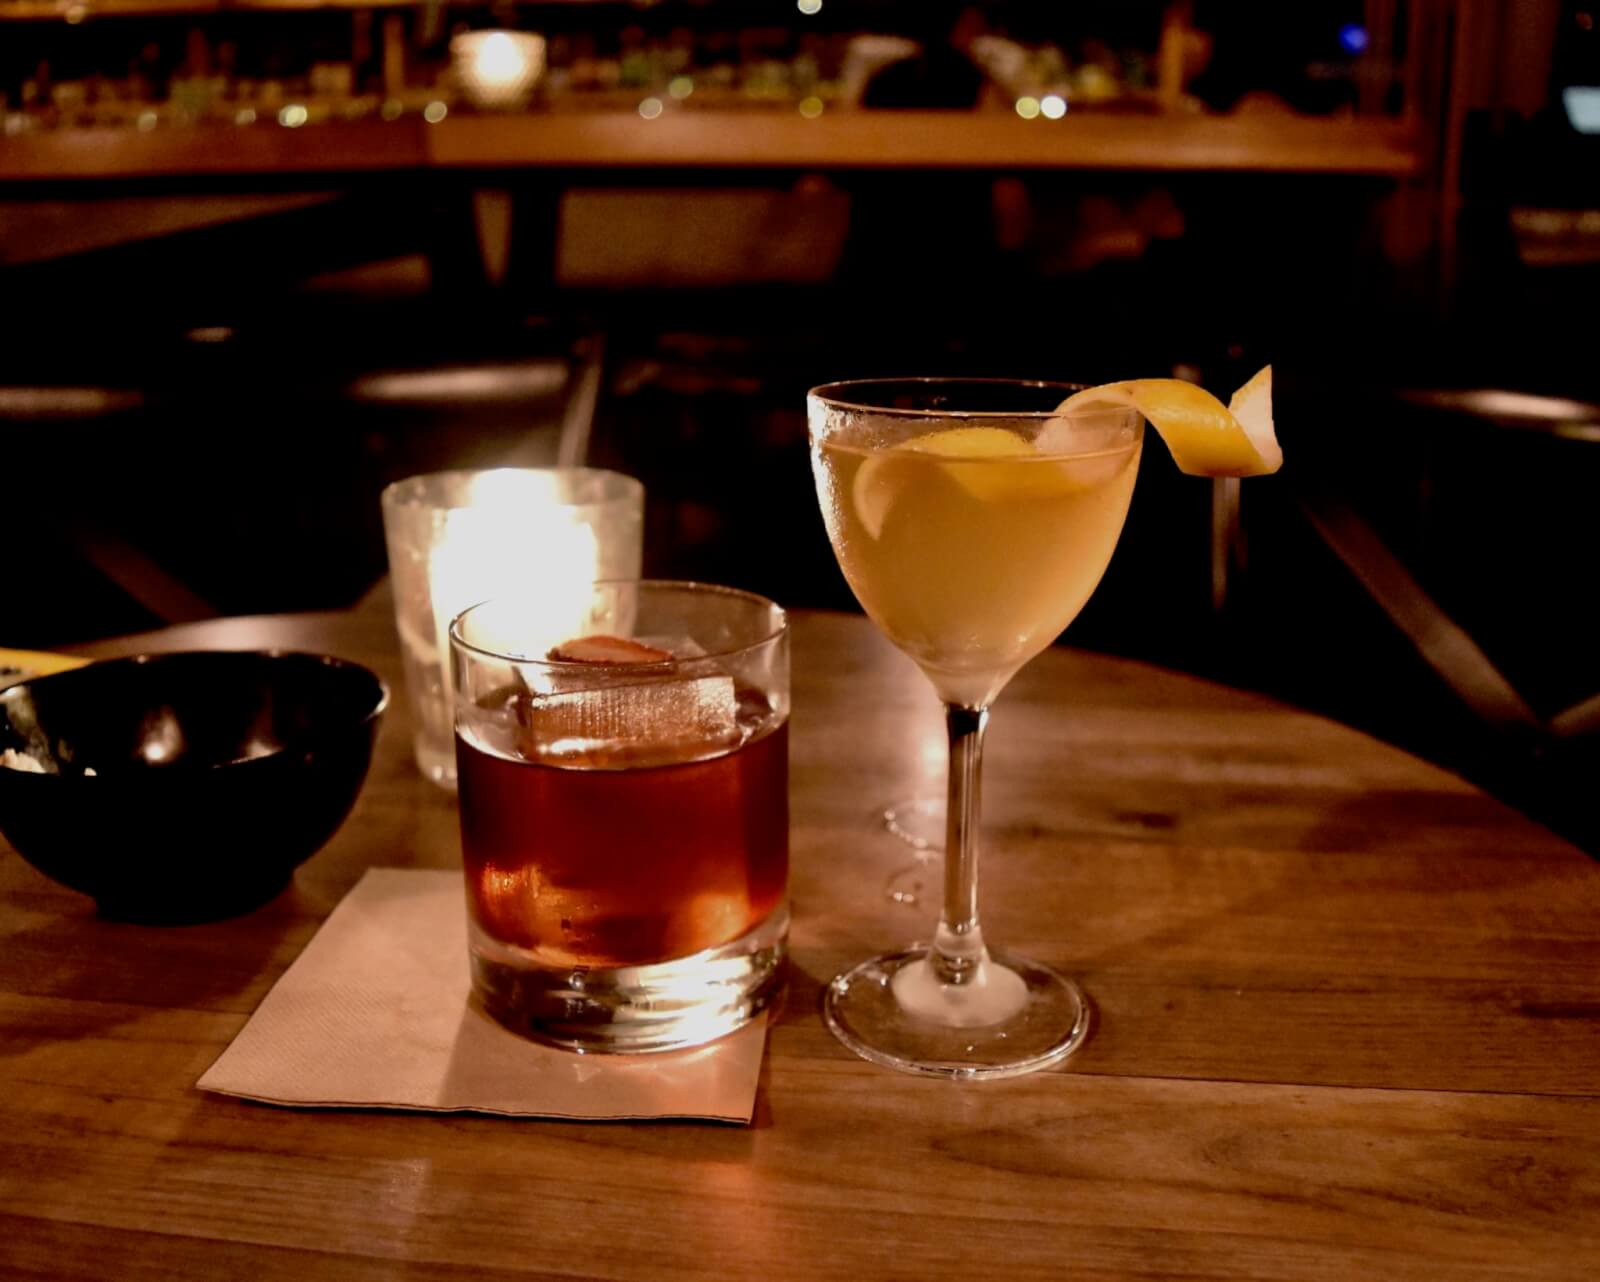 A martini cocktail and an old fashioned cocktail